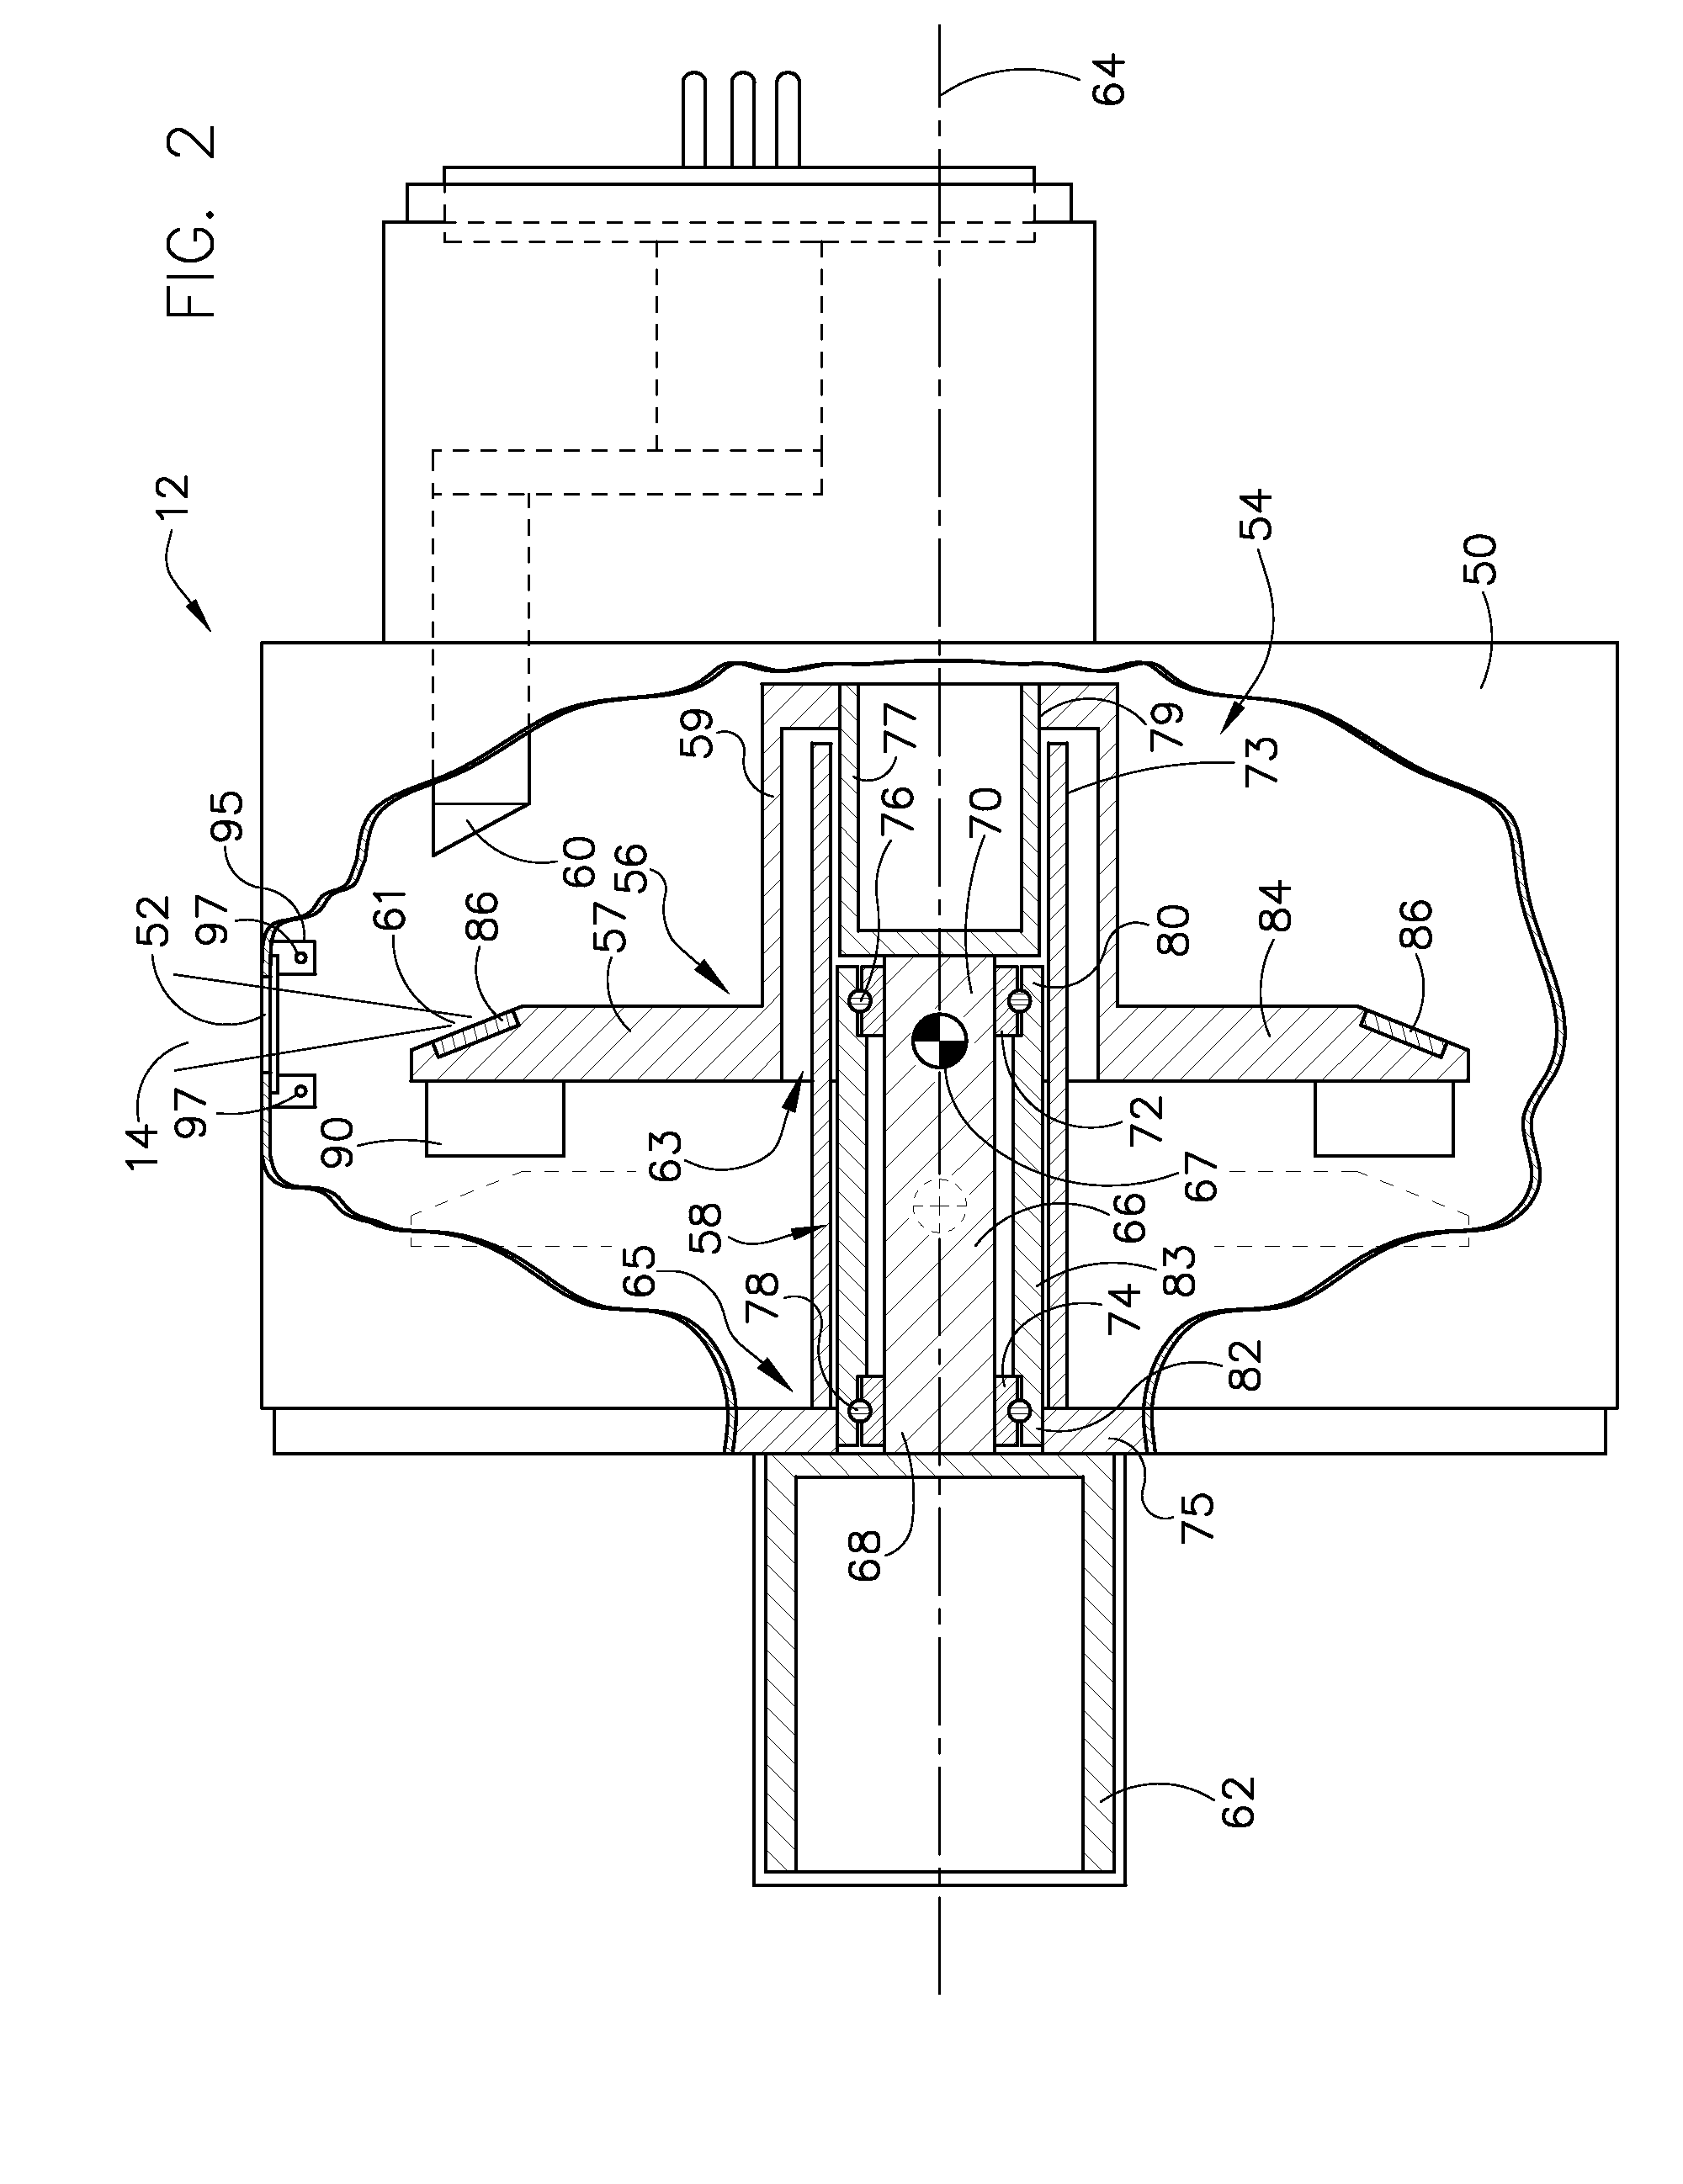 Apparatus for reducing kV-dependent artifacts in an imaging system and method of making same